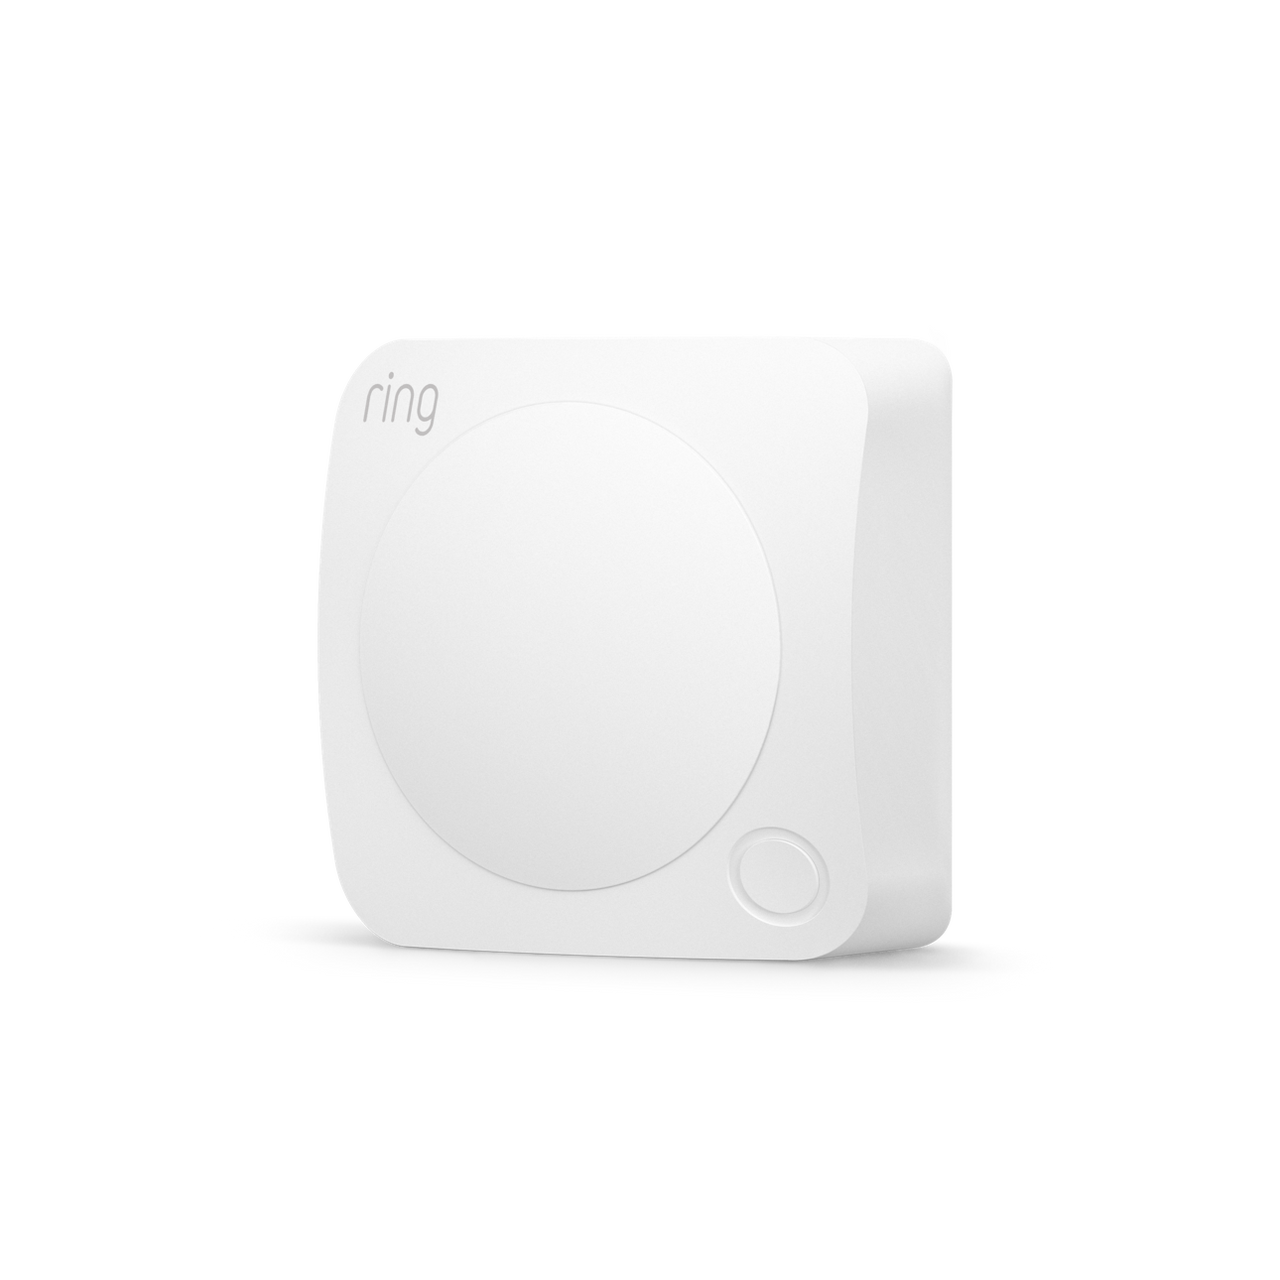 products/Alarm2.0-MotionDetector_angled_1290x1290_489b2795-0f06-4e23-a68b-ee7ee980627f.png